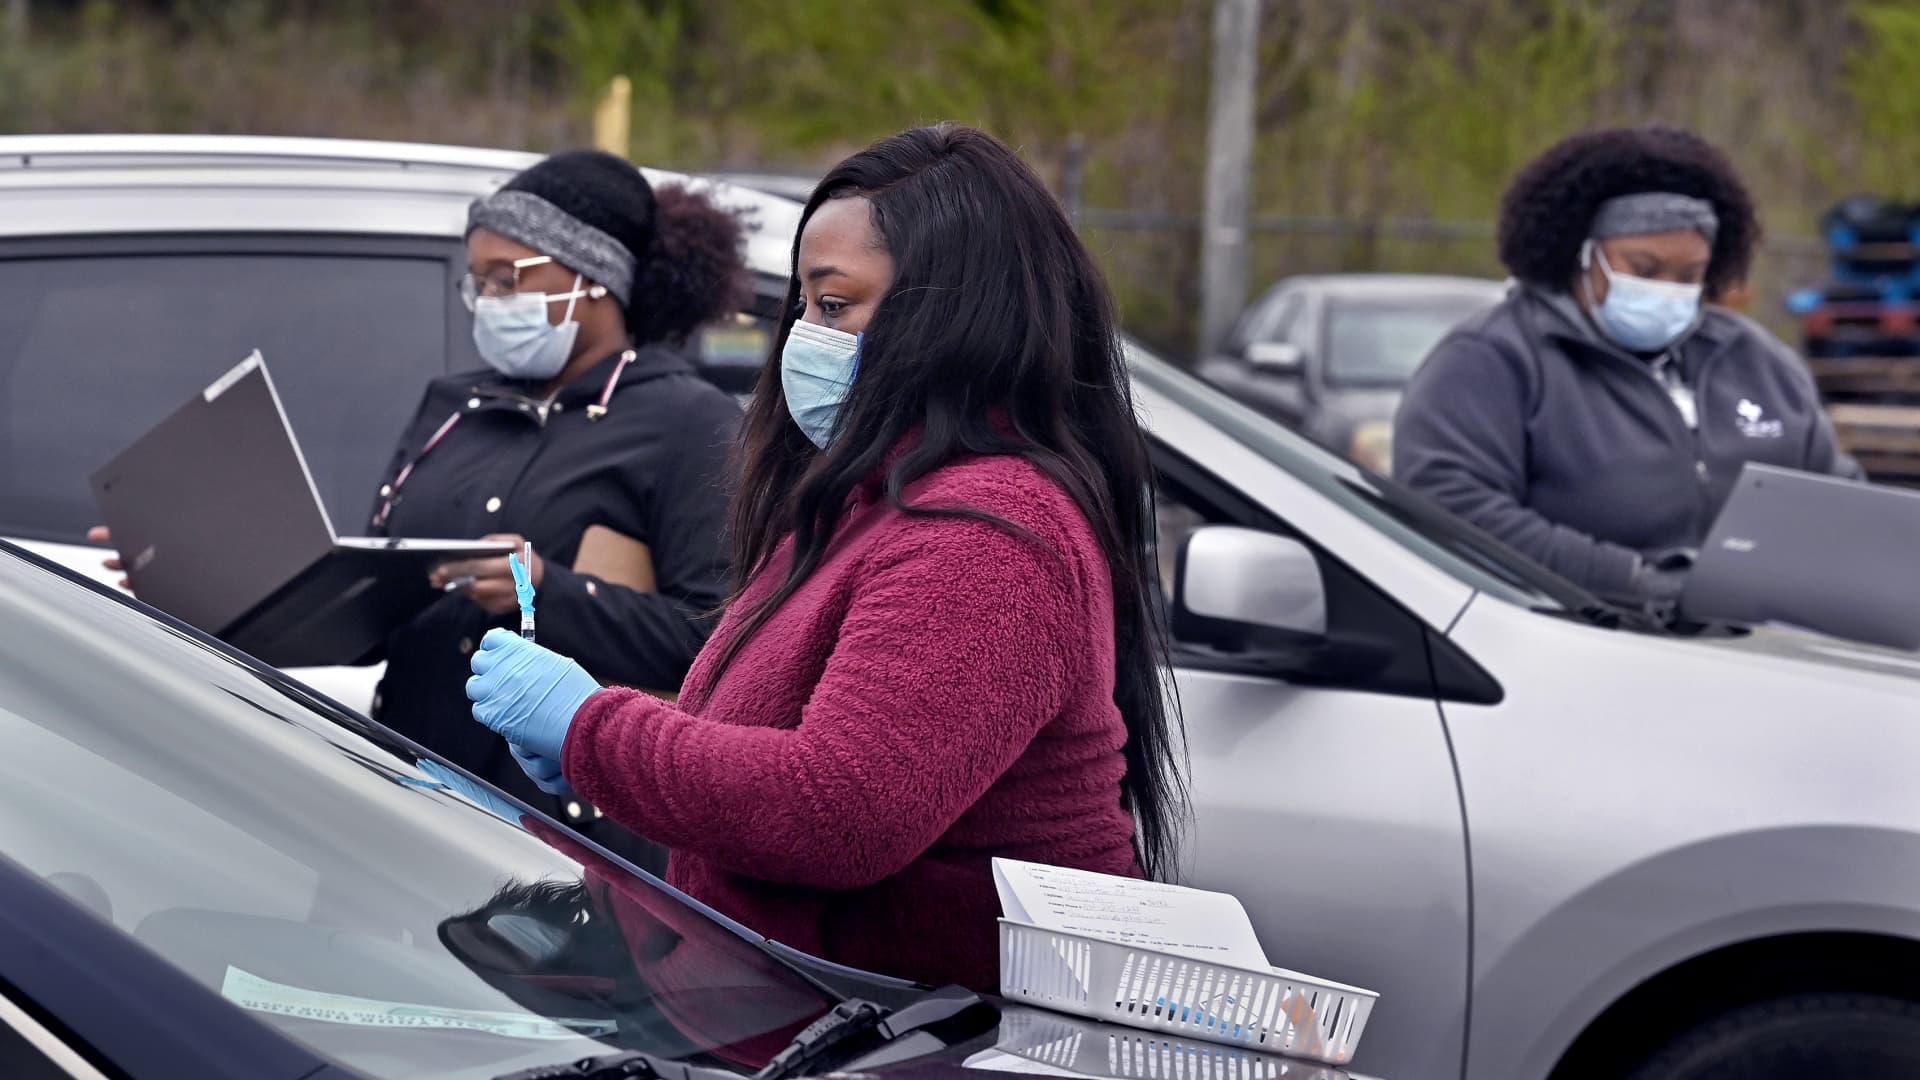 Lashondra Walter, (center), a nurse practitioner for Cahaba Medical Care gets ready to give a shot to a person in their car. She was joined by colleagues who roamed the parking lot with laptops to register people at the Linden National Guard Armory in Linden, Alabama on Friday, March 19, 2021.